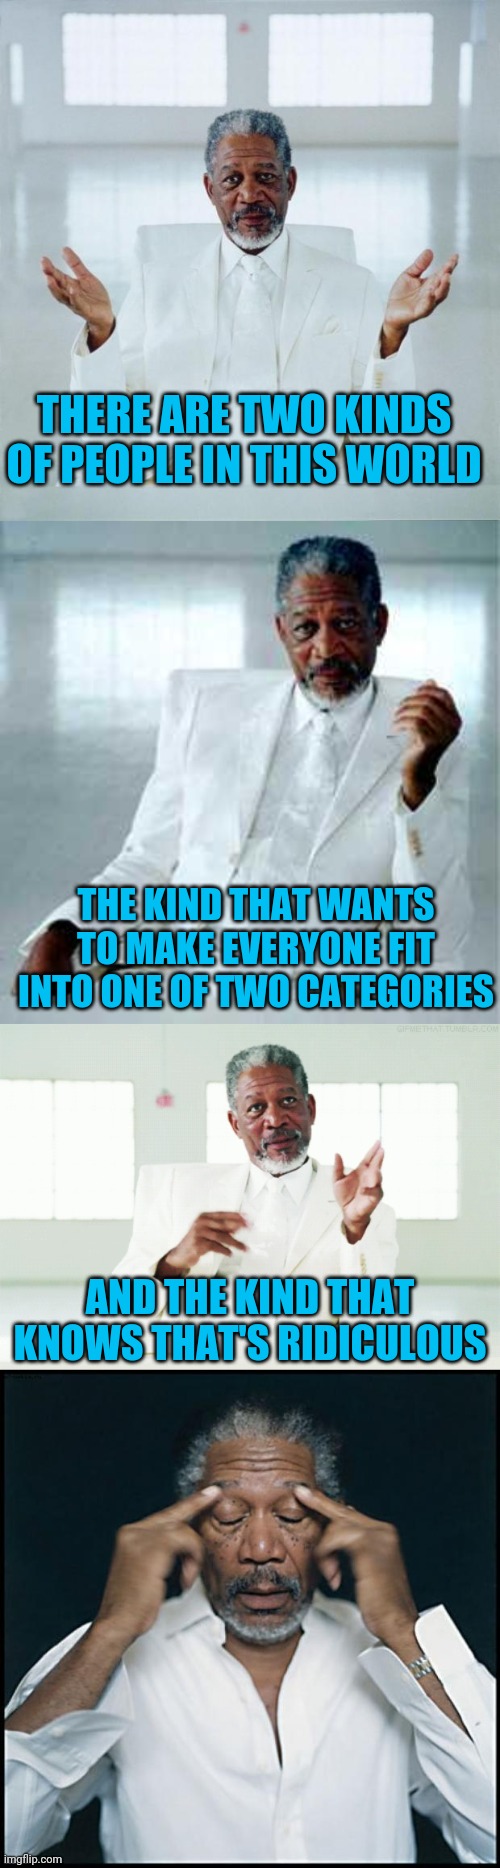 Trumper v. Libtard? | THERE ARE TWO KINDS OF PEOPLE IN THIS WORLD; THE KIND THAT WANTS TO MAKE EVERYONE FIT INTO ONE OF TWO CATEGORIES; AND THE KIND THAT KNOWS THAT'S RIDICULOUS | image tagged in morgan freeman god,morgan freeman headache | made w/ Imgflip meme maker